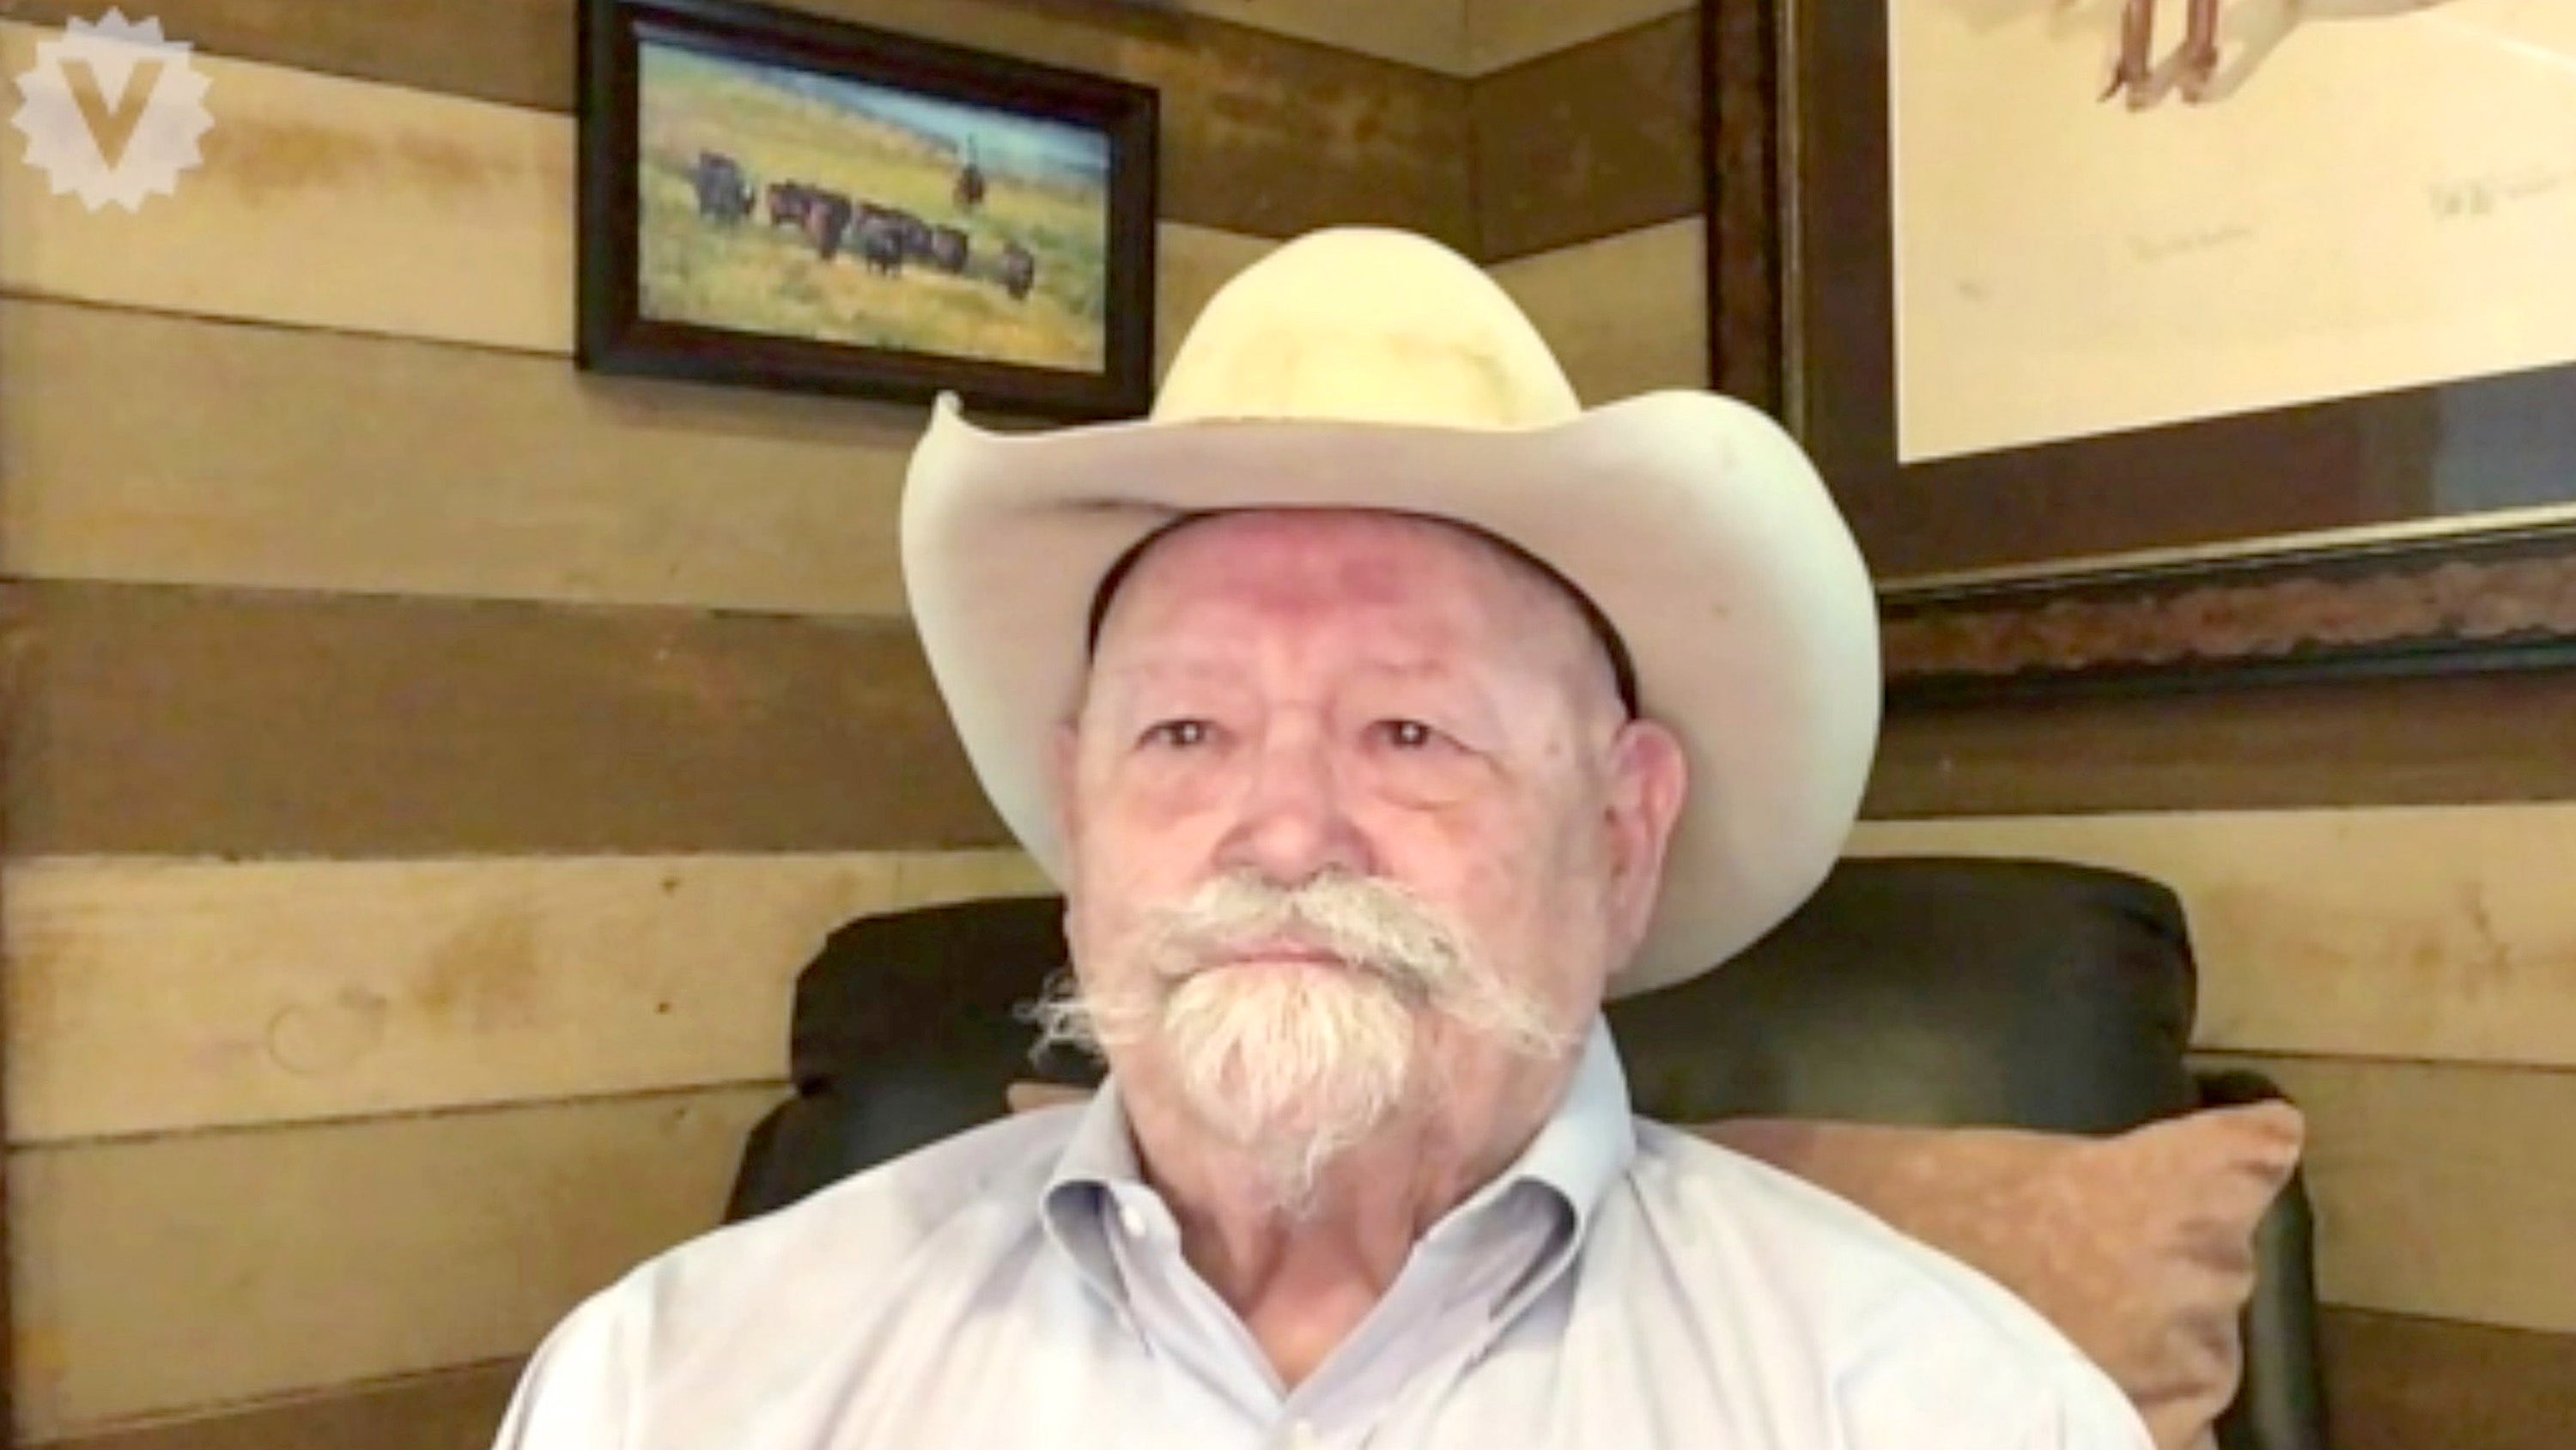 'Yellowstone' actor Barry Corbin opens up about oral cancer battle